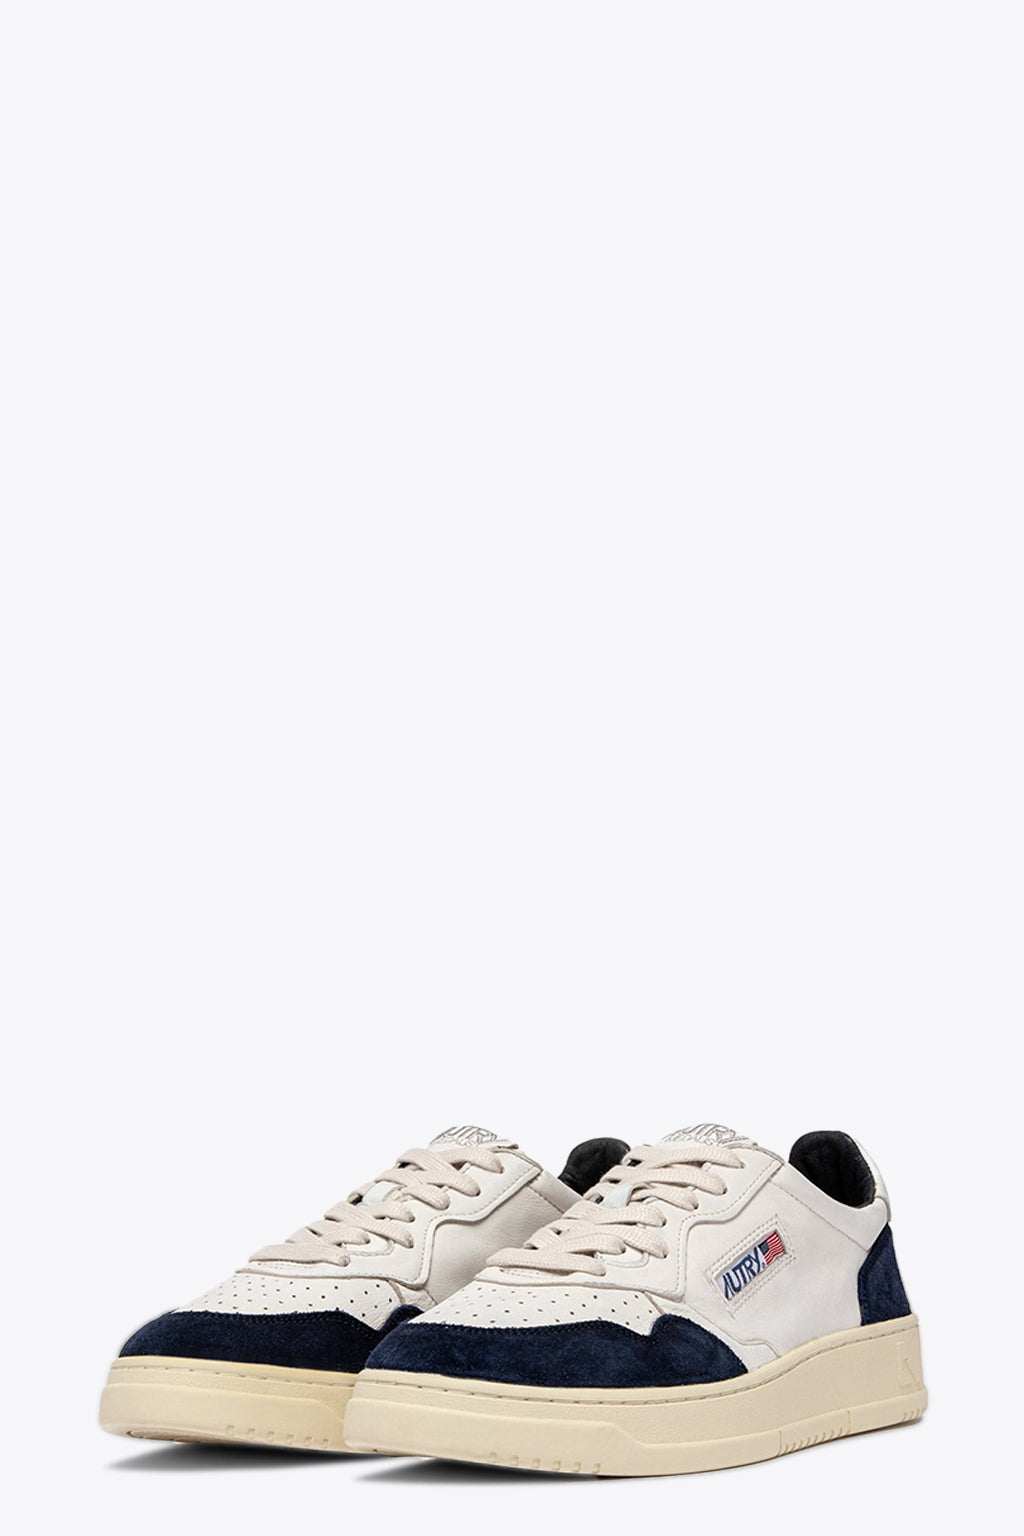 alt-image__White-leather-low-sneaker-with-black-suede-detail---Medalist